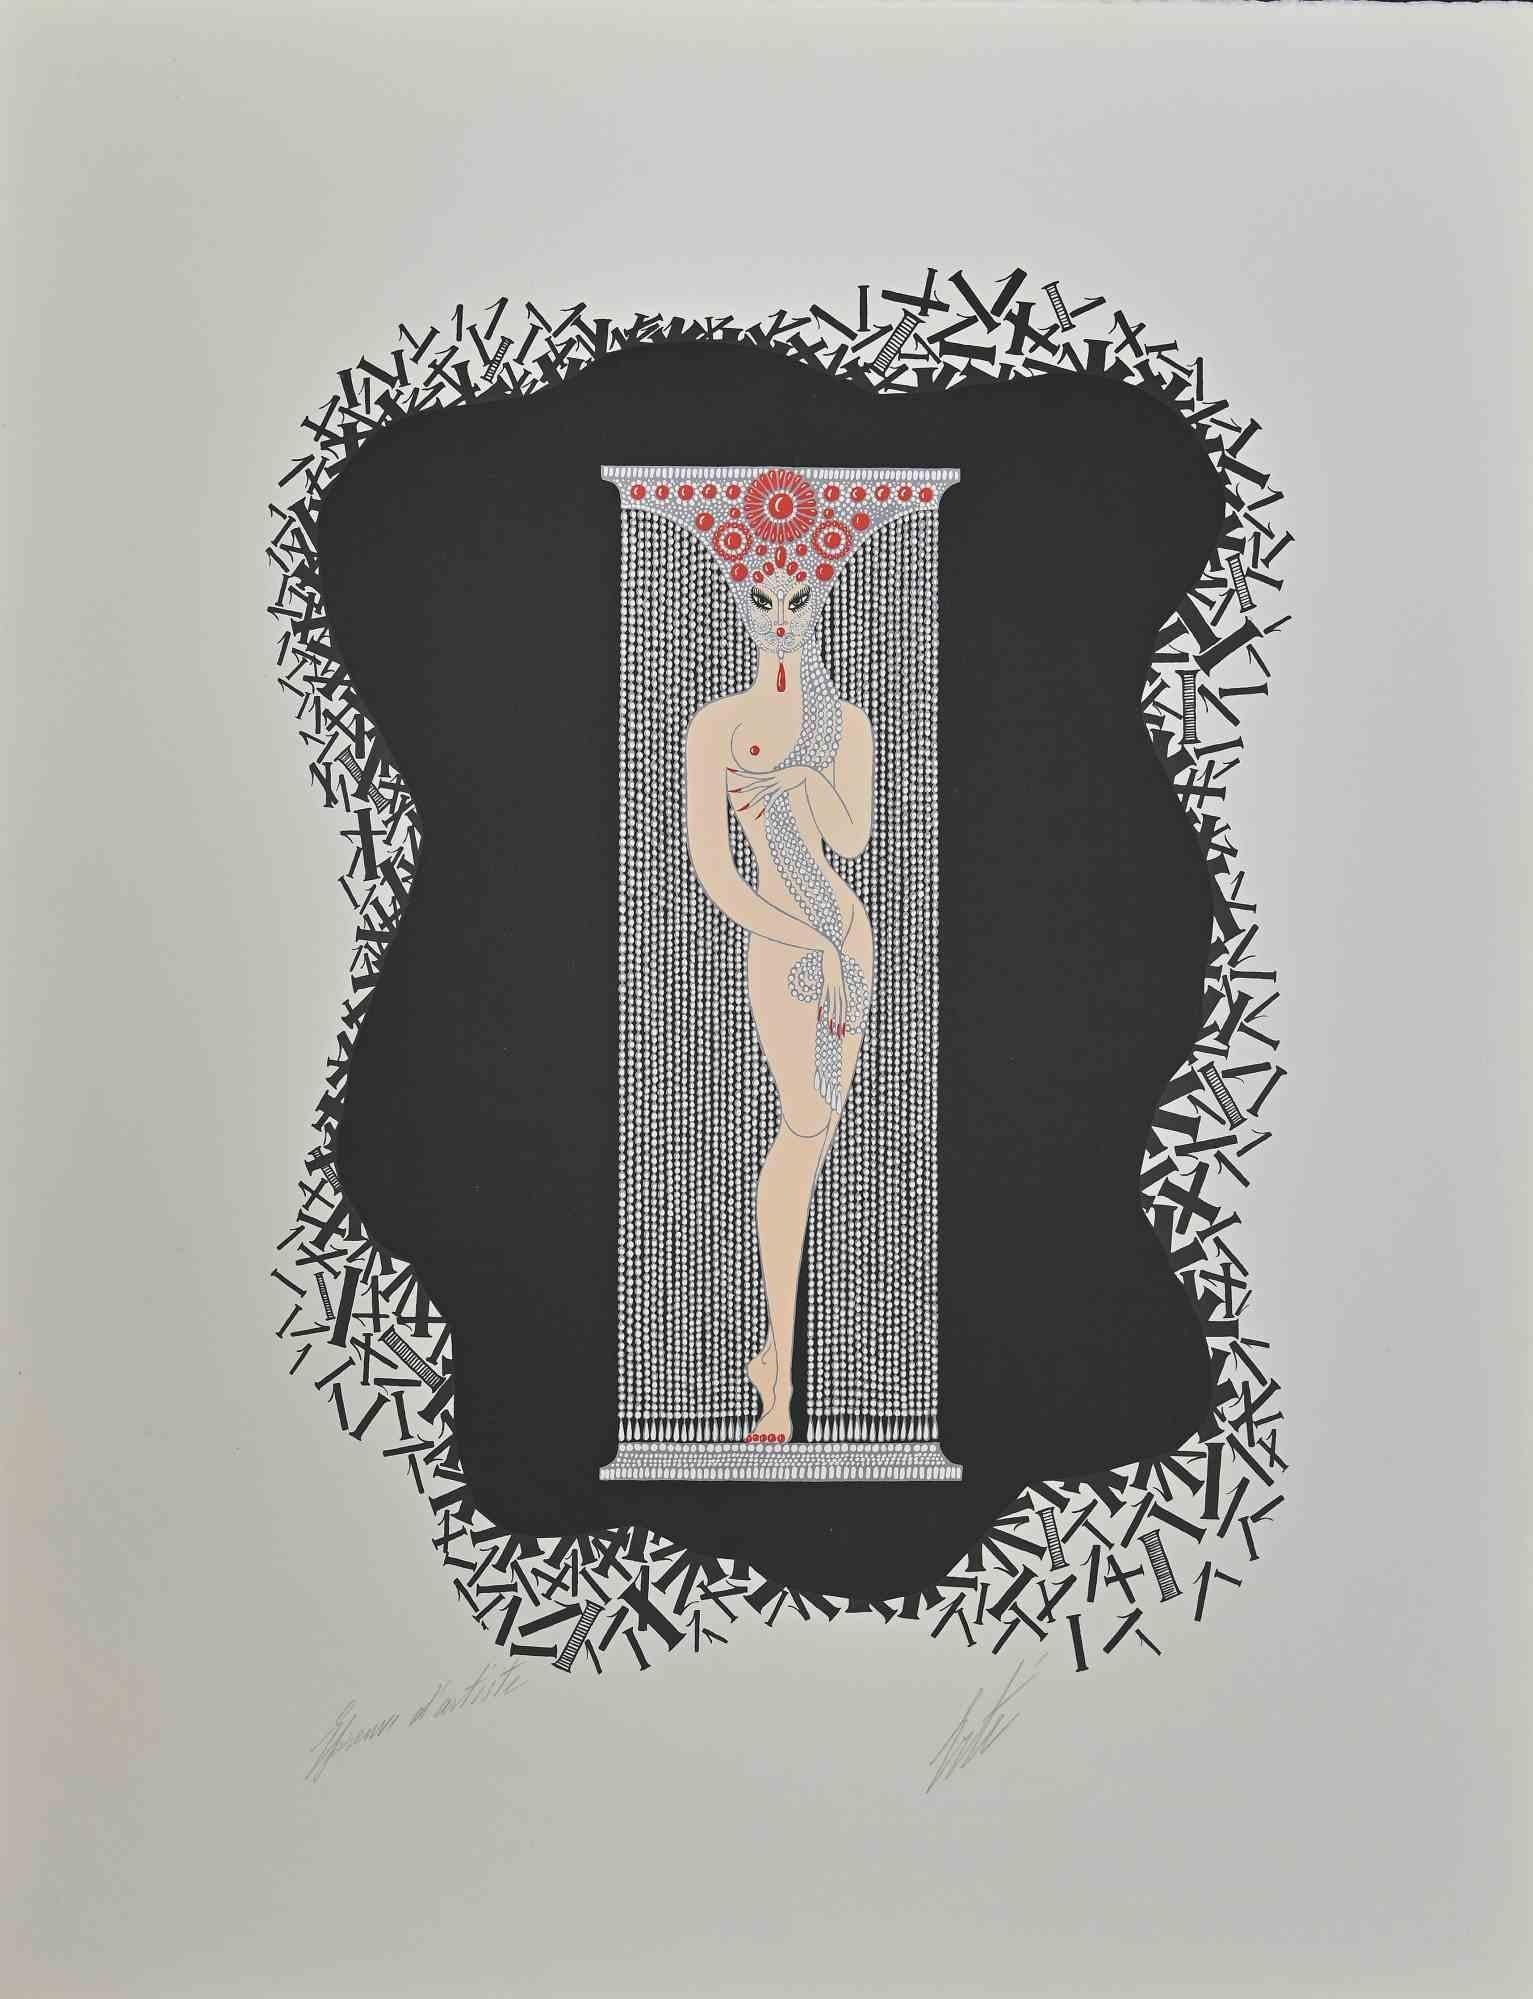 Le 1 is a contemporary modern artwork realized in 1968 by Erté (Romain de Tirtoff).

Mixed colored lithograph on paper.

The artwork is from the Series "Les Chiffres".

Hand signed on the lower margin.

Artist's proof.

Good conditions except for